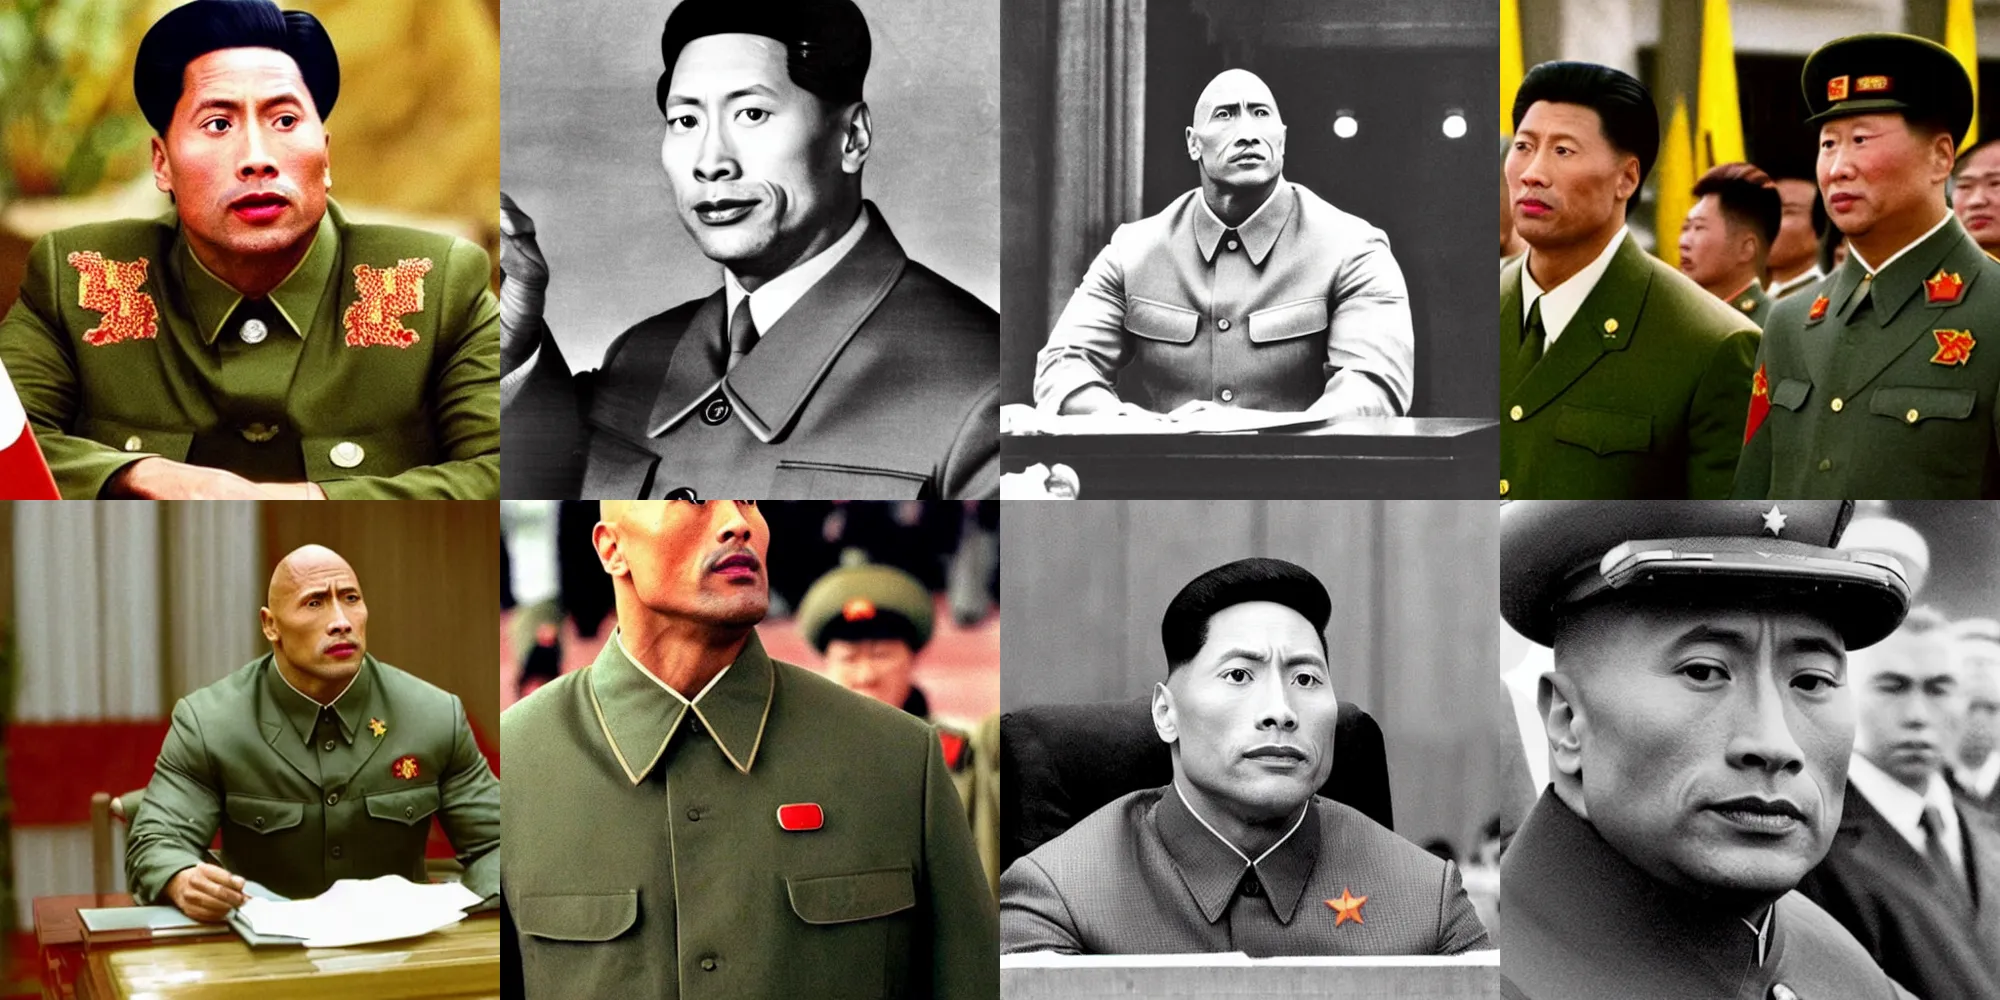 Prompt: Dwayne Johnson as Mao Zedong, leader of China. He is dressed like a military dictator, and is in a conference with Soviet Leaders in Siberia.